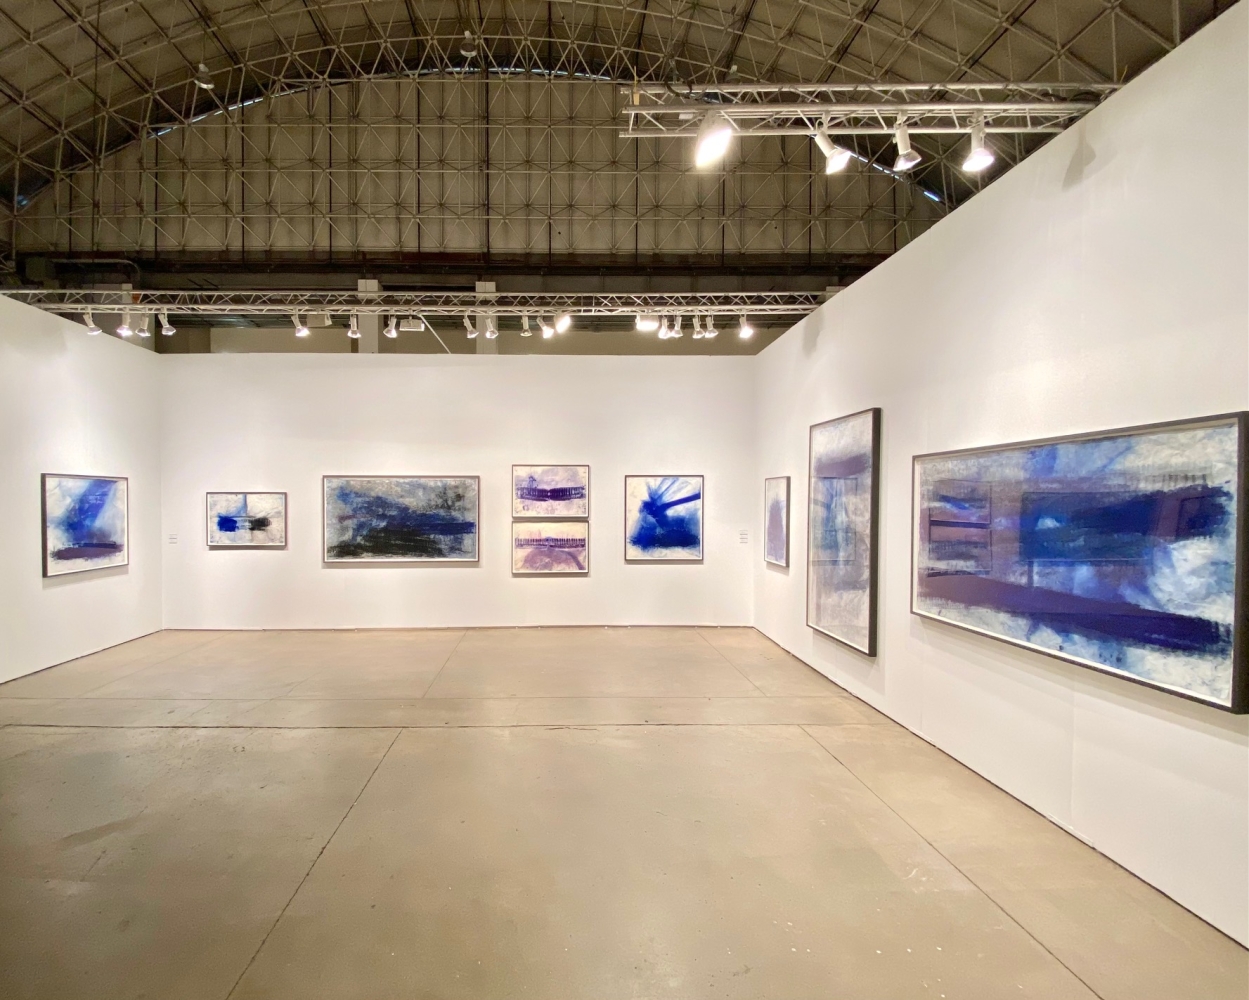 Luhring Augustine
EXPO Chicago, In/Situ
Installation view
2022